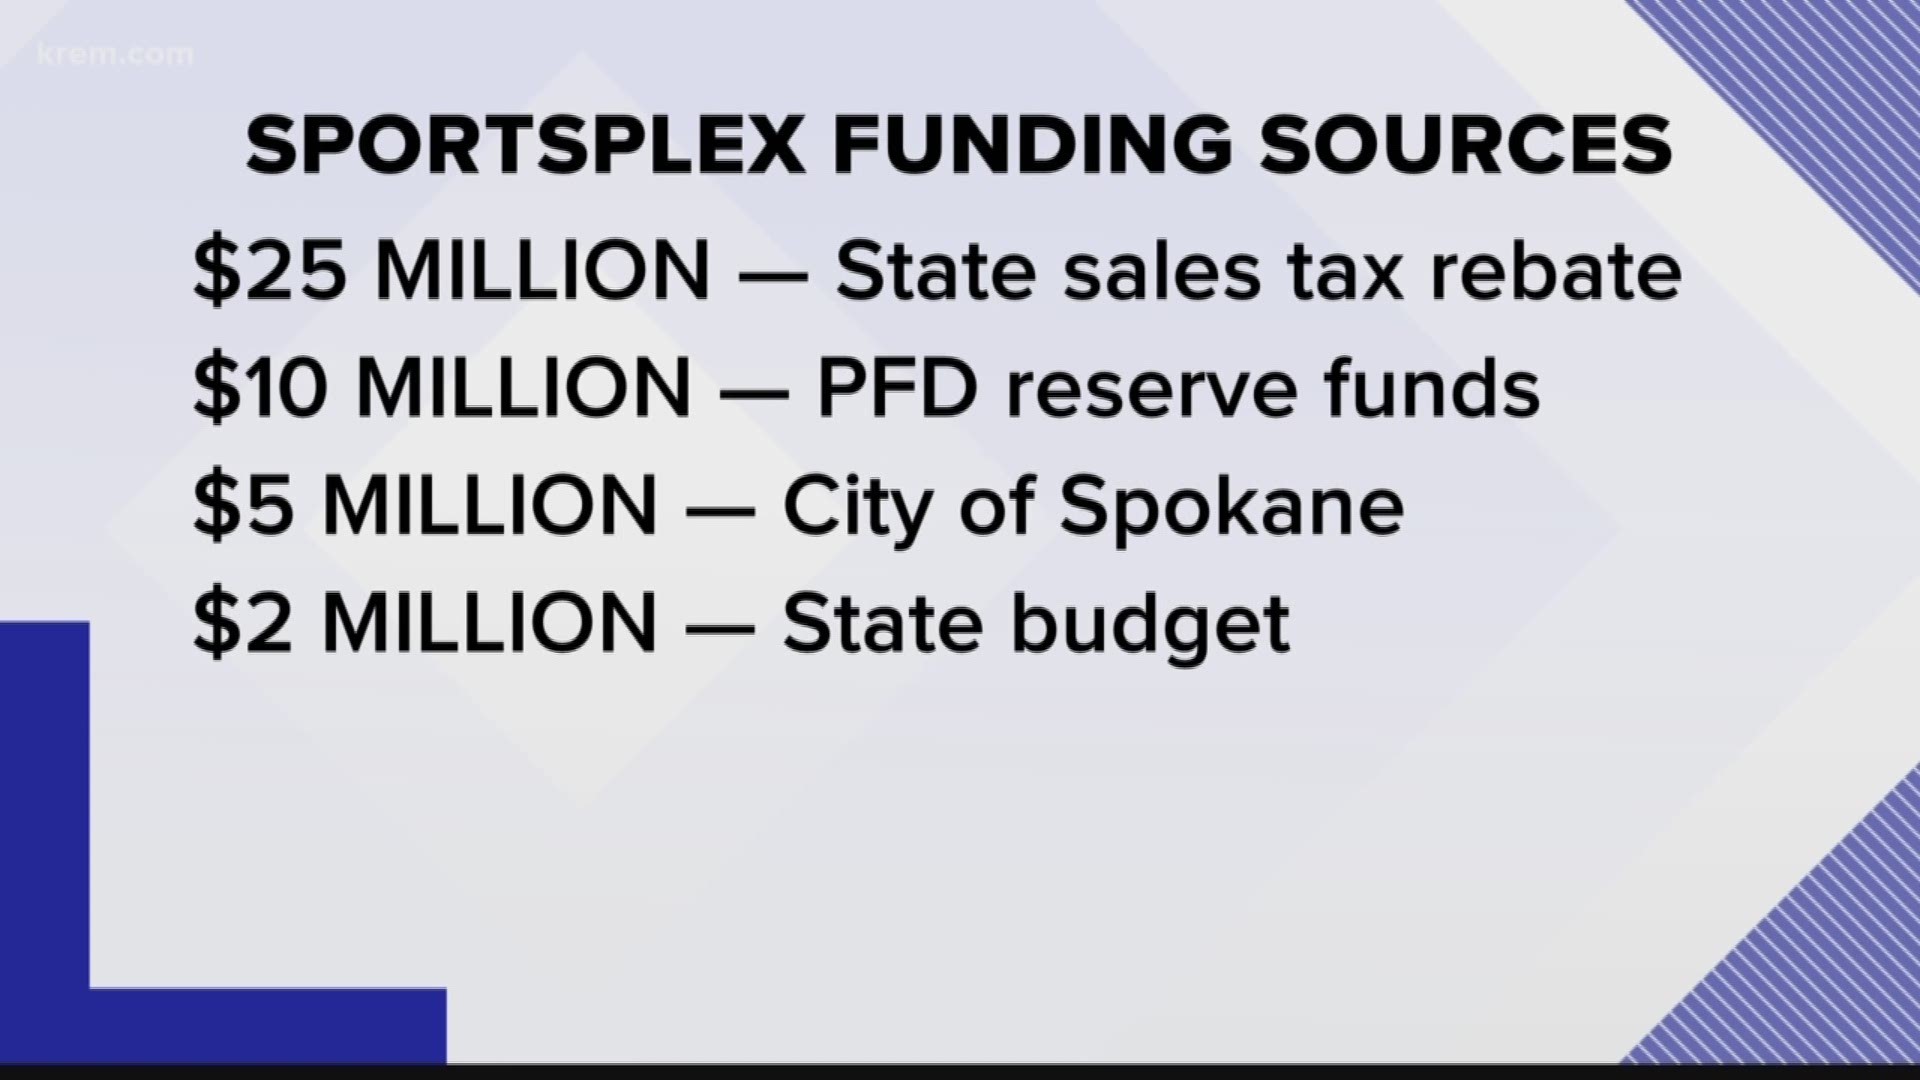 Spokane City Council approved $5 million for the Sportsplex on Monday. It's an arena project spearheaded by the Public Facilities District.